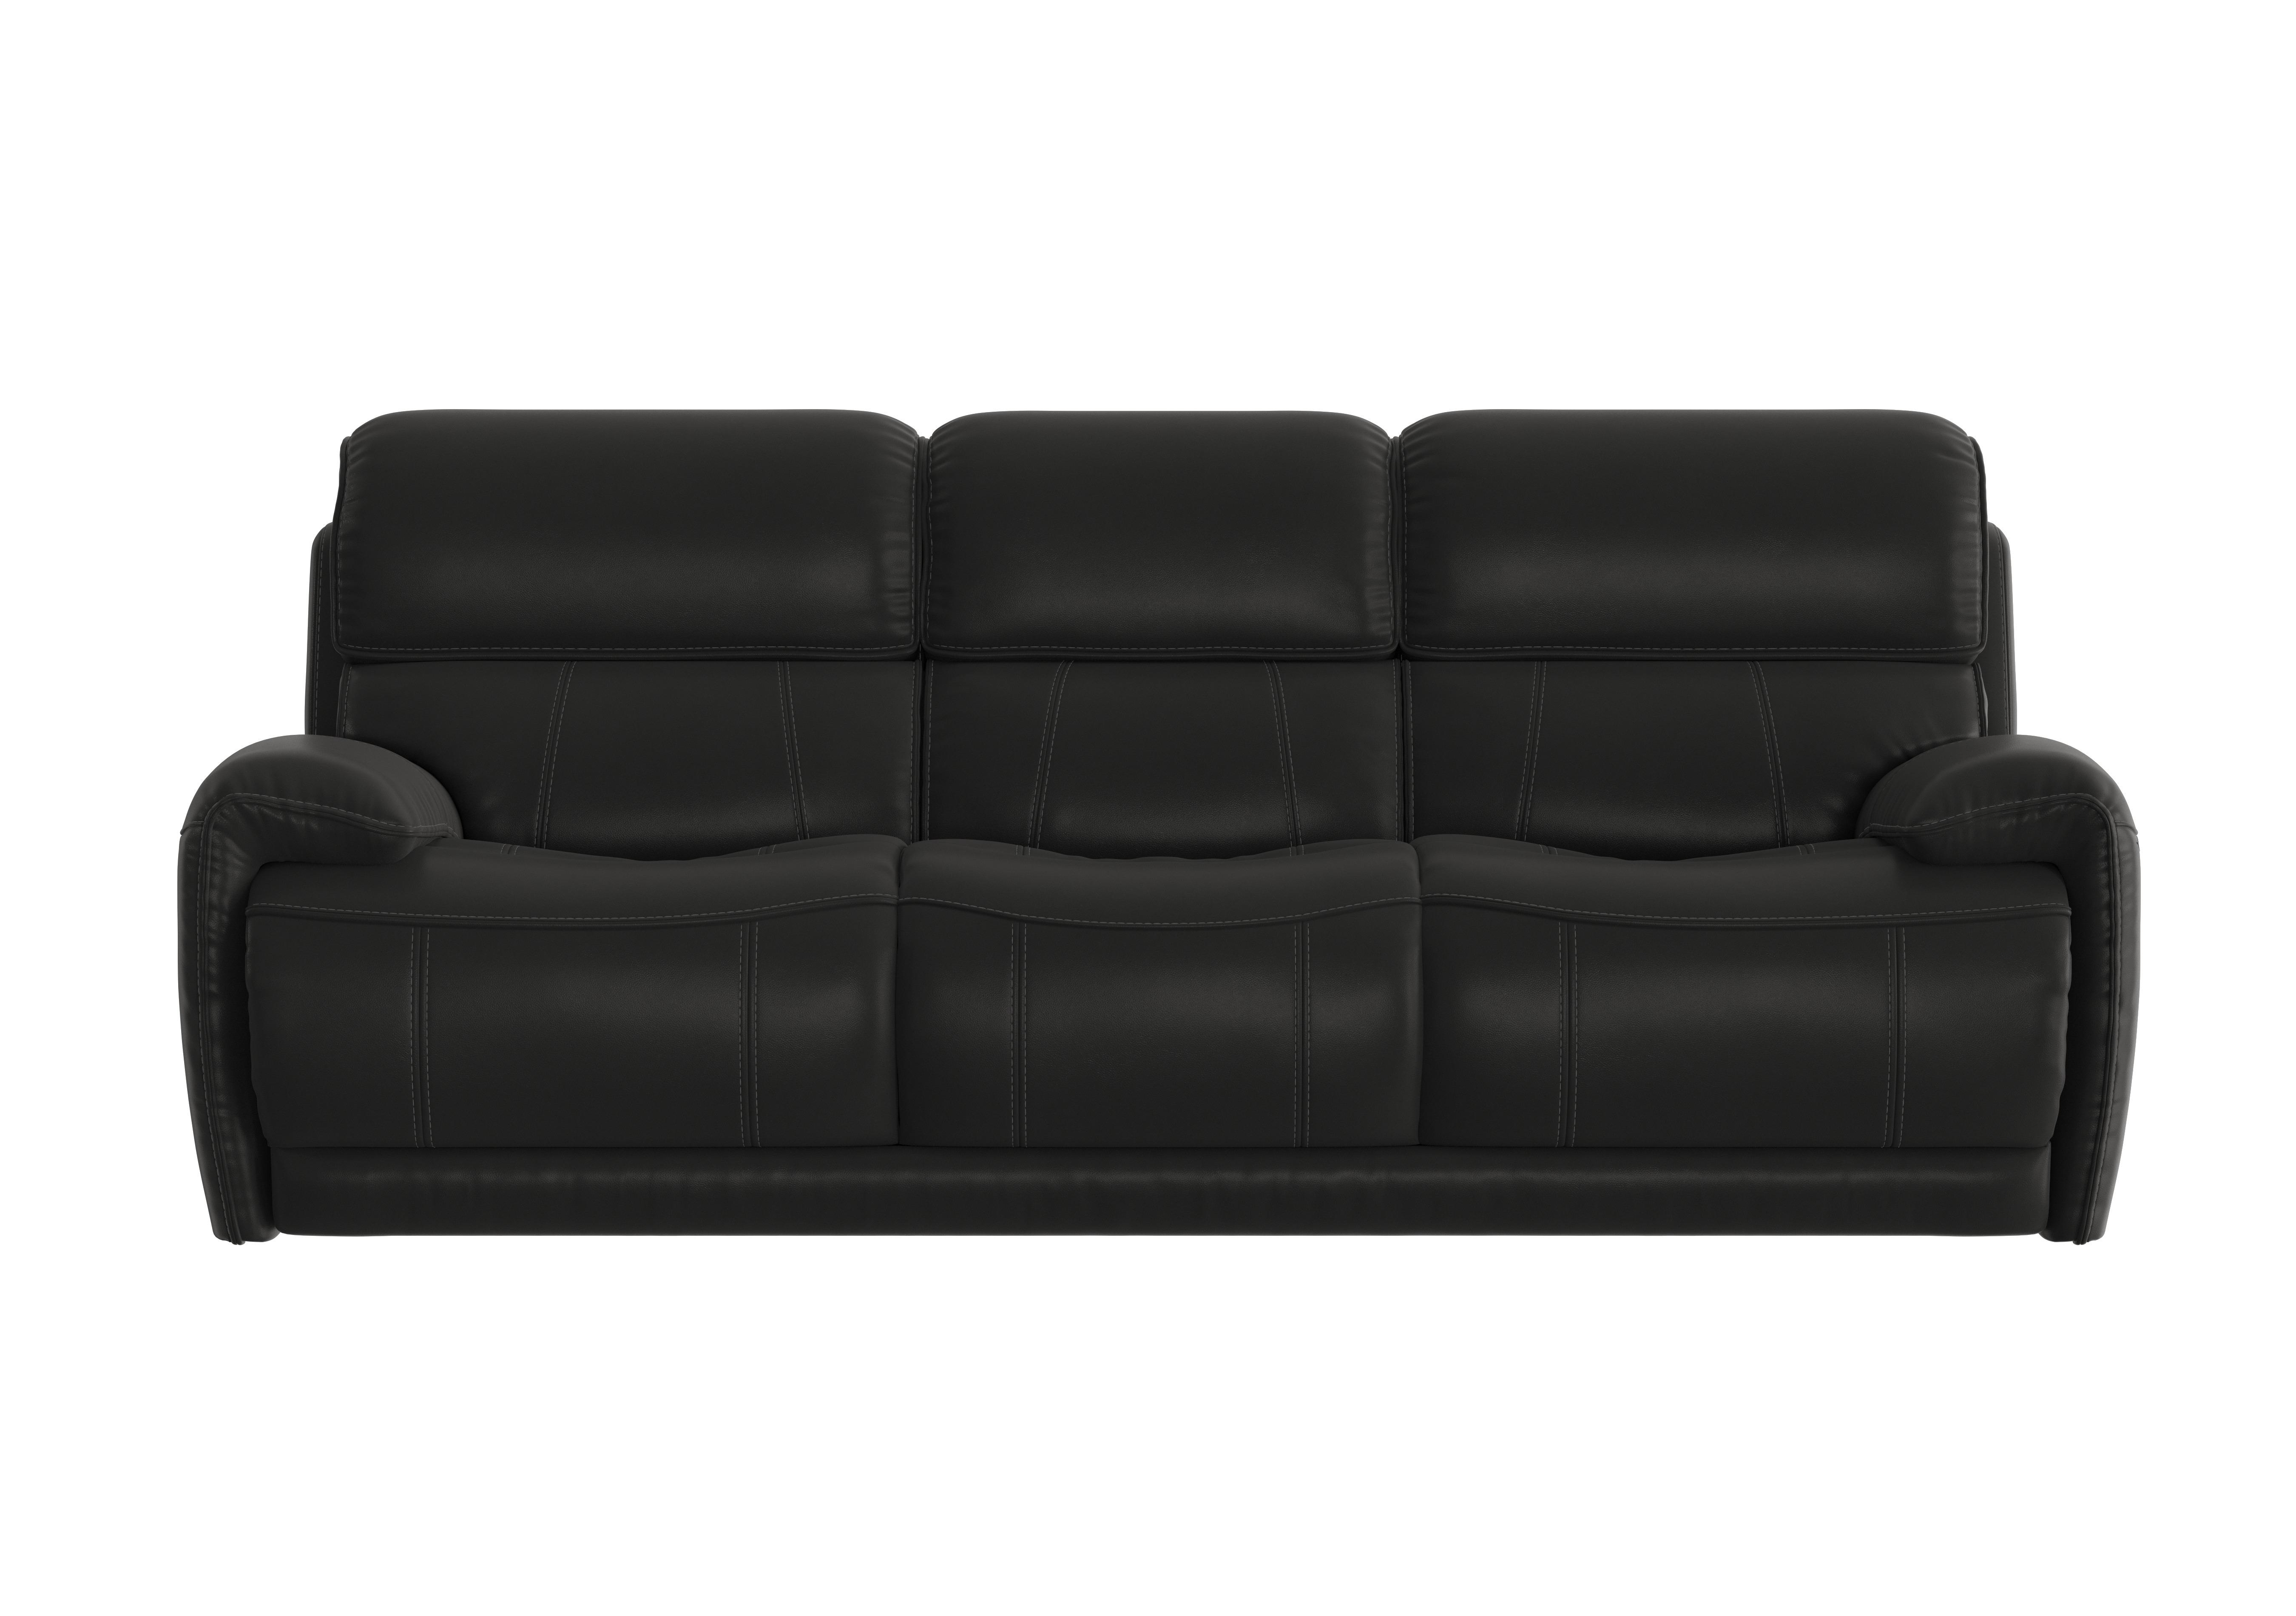 Link 3 Seater Leather Sofa in Bv-3500 Classic Black on Furniture Village